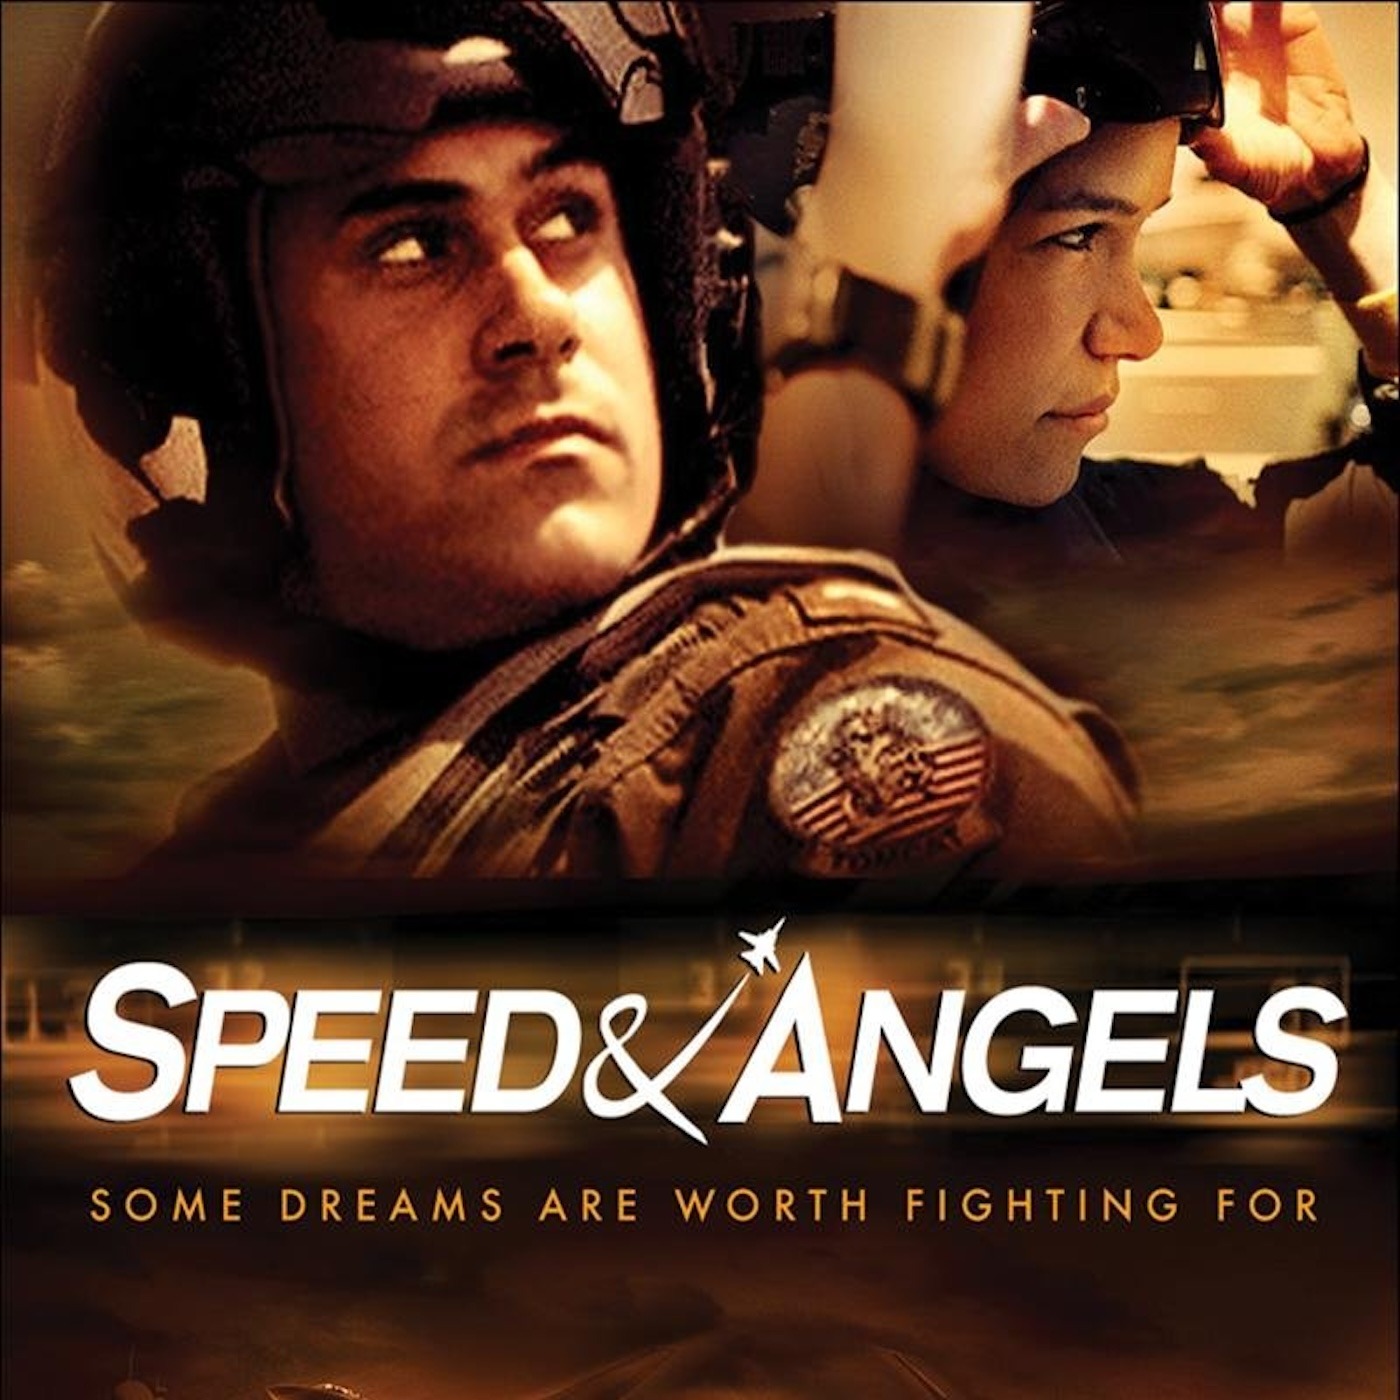 FPP146 - Speed & Angels: The Naval Aviation Documentary, not Movie